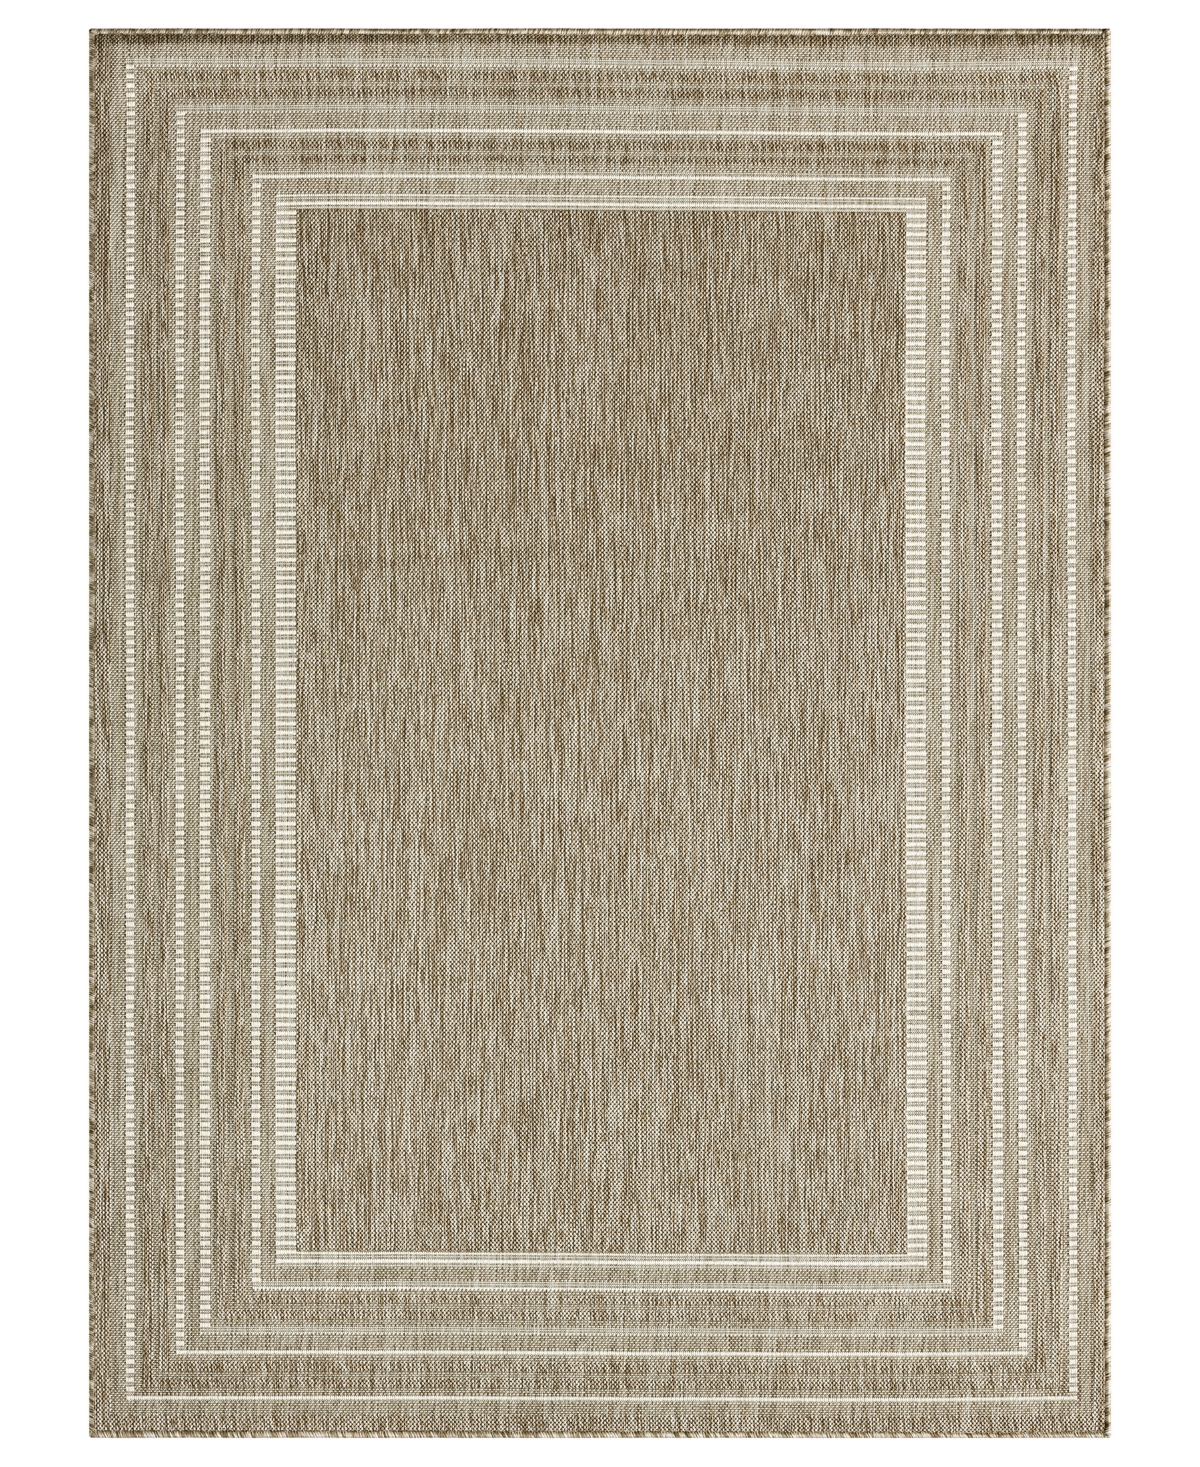 Nicole Miller Patio Country Layla 5'2" X 7'2" Area Rug In Taupe